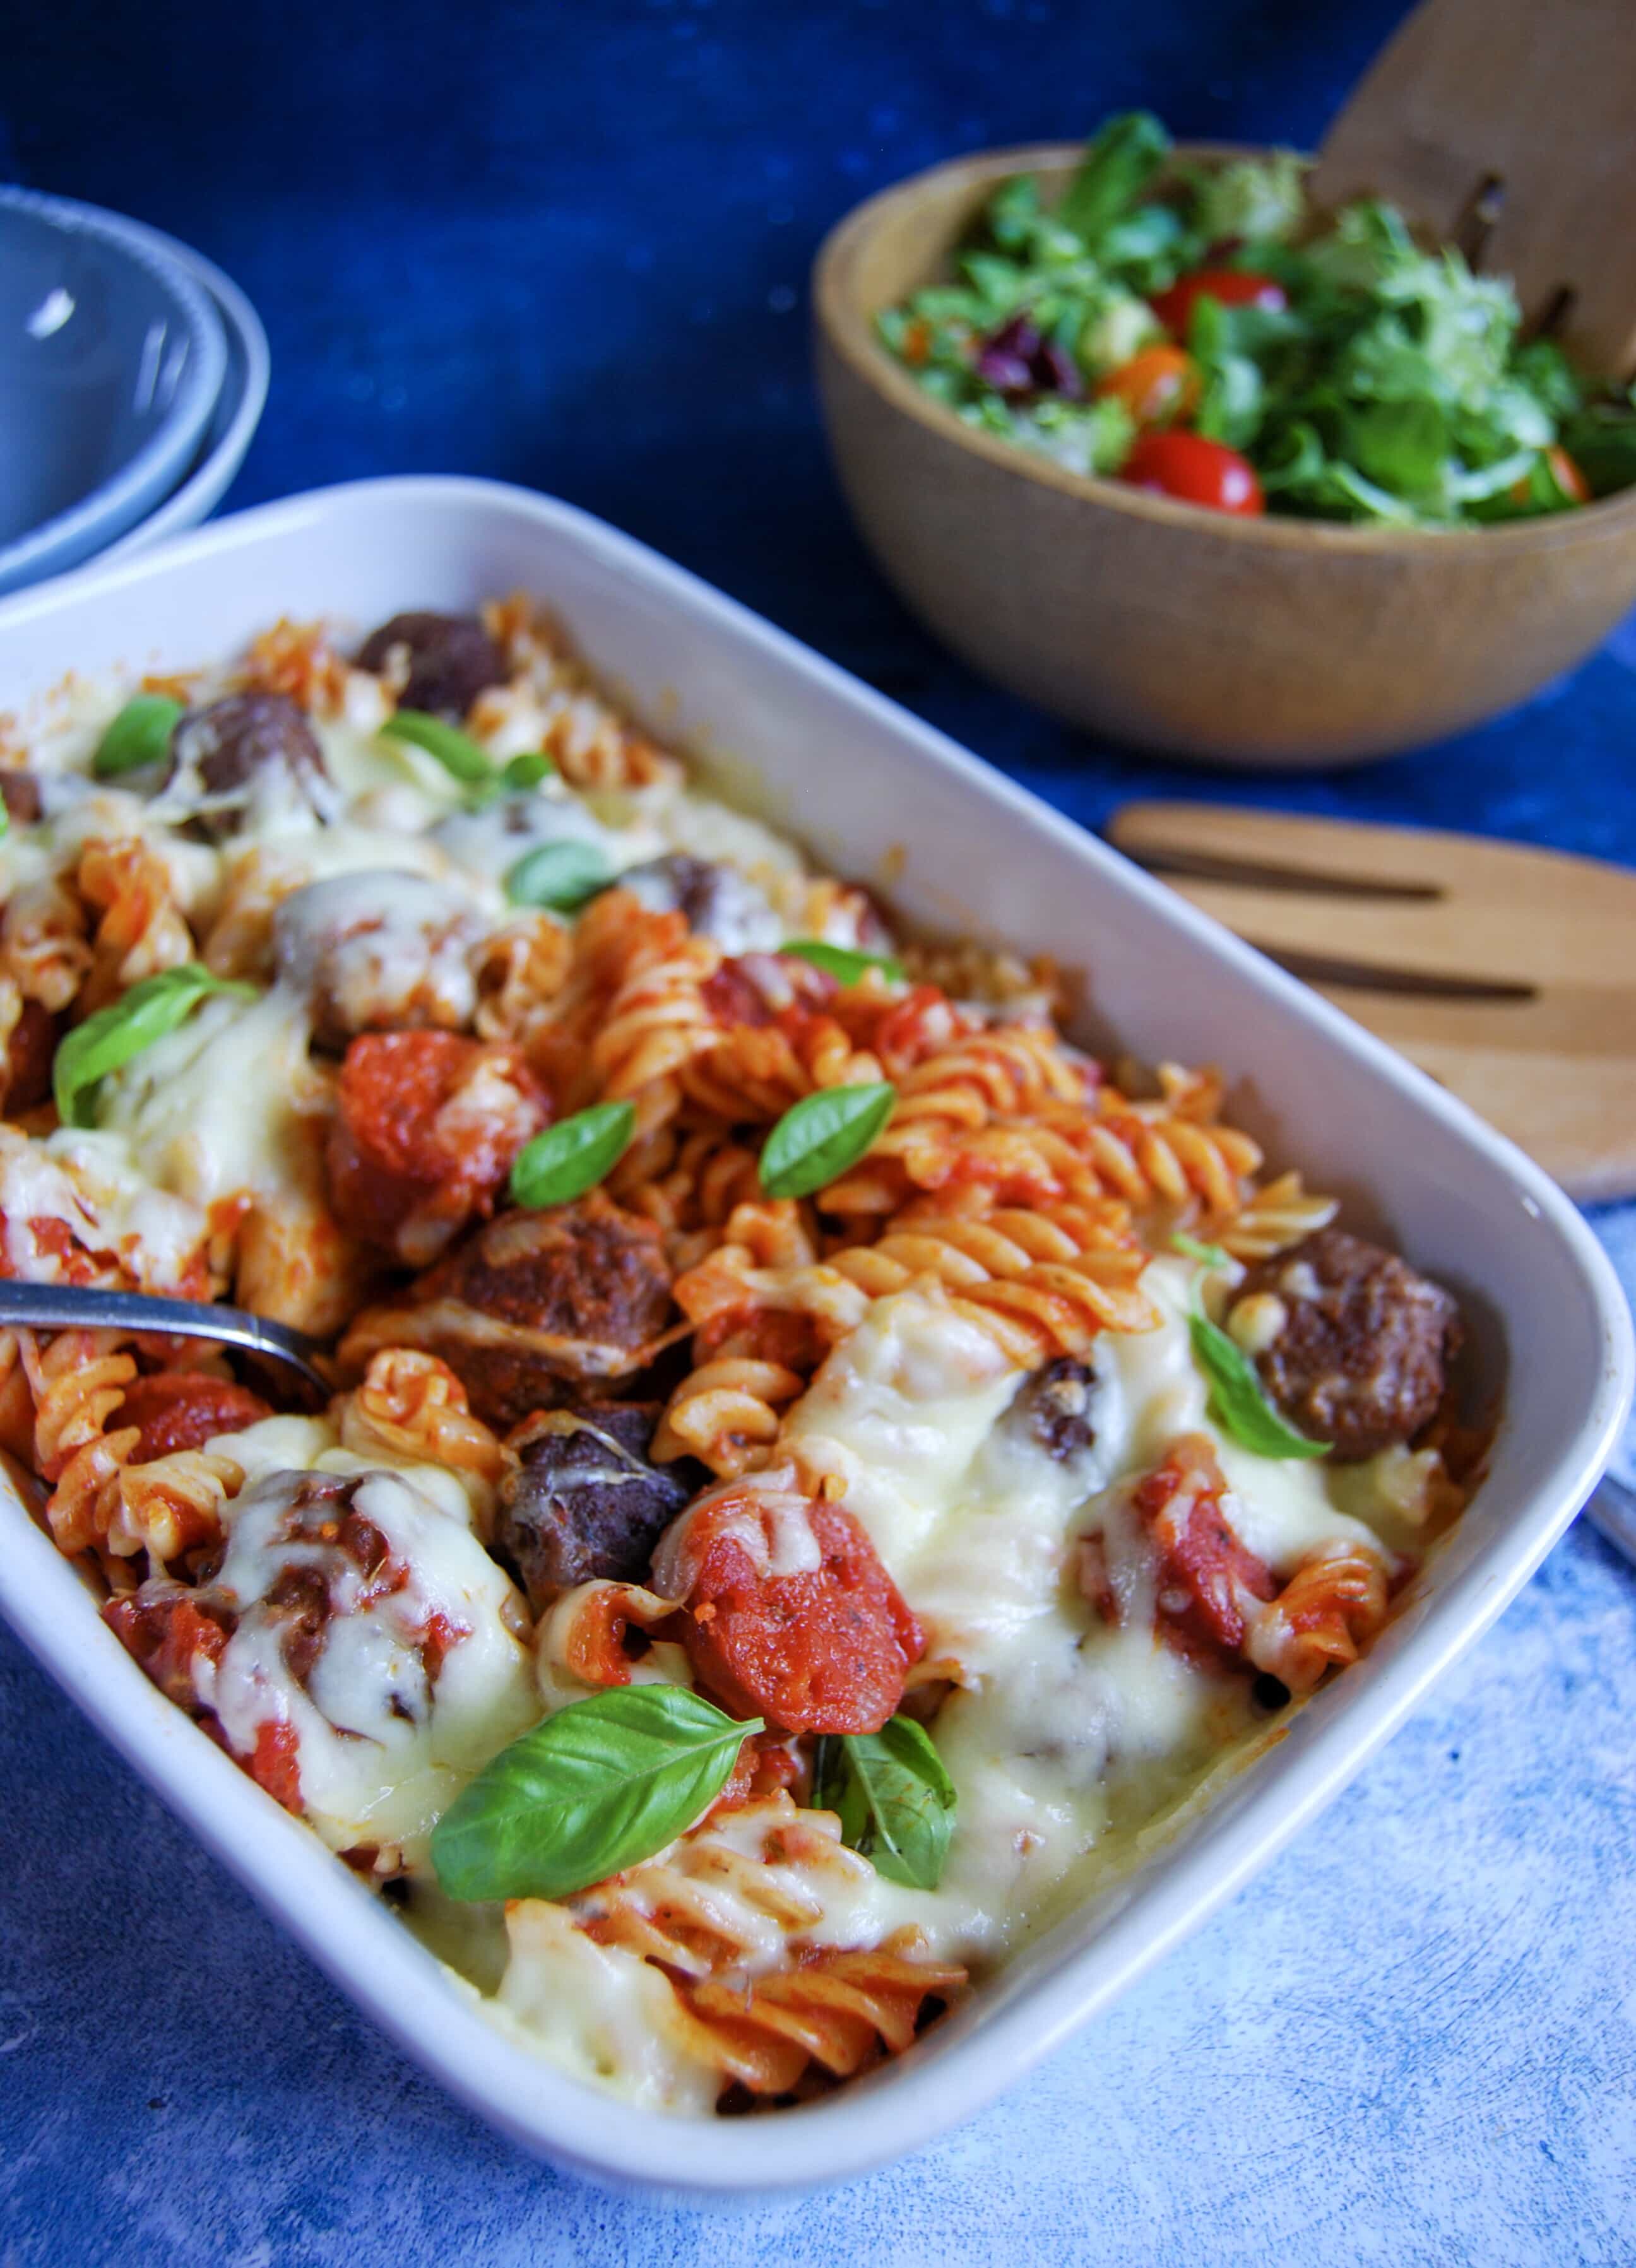 A picture of a mozzarella meatball pasta bake. A wooden bowl of salad can be seen in the background.